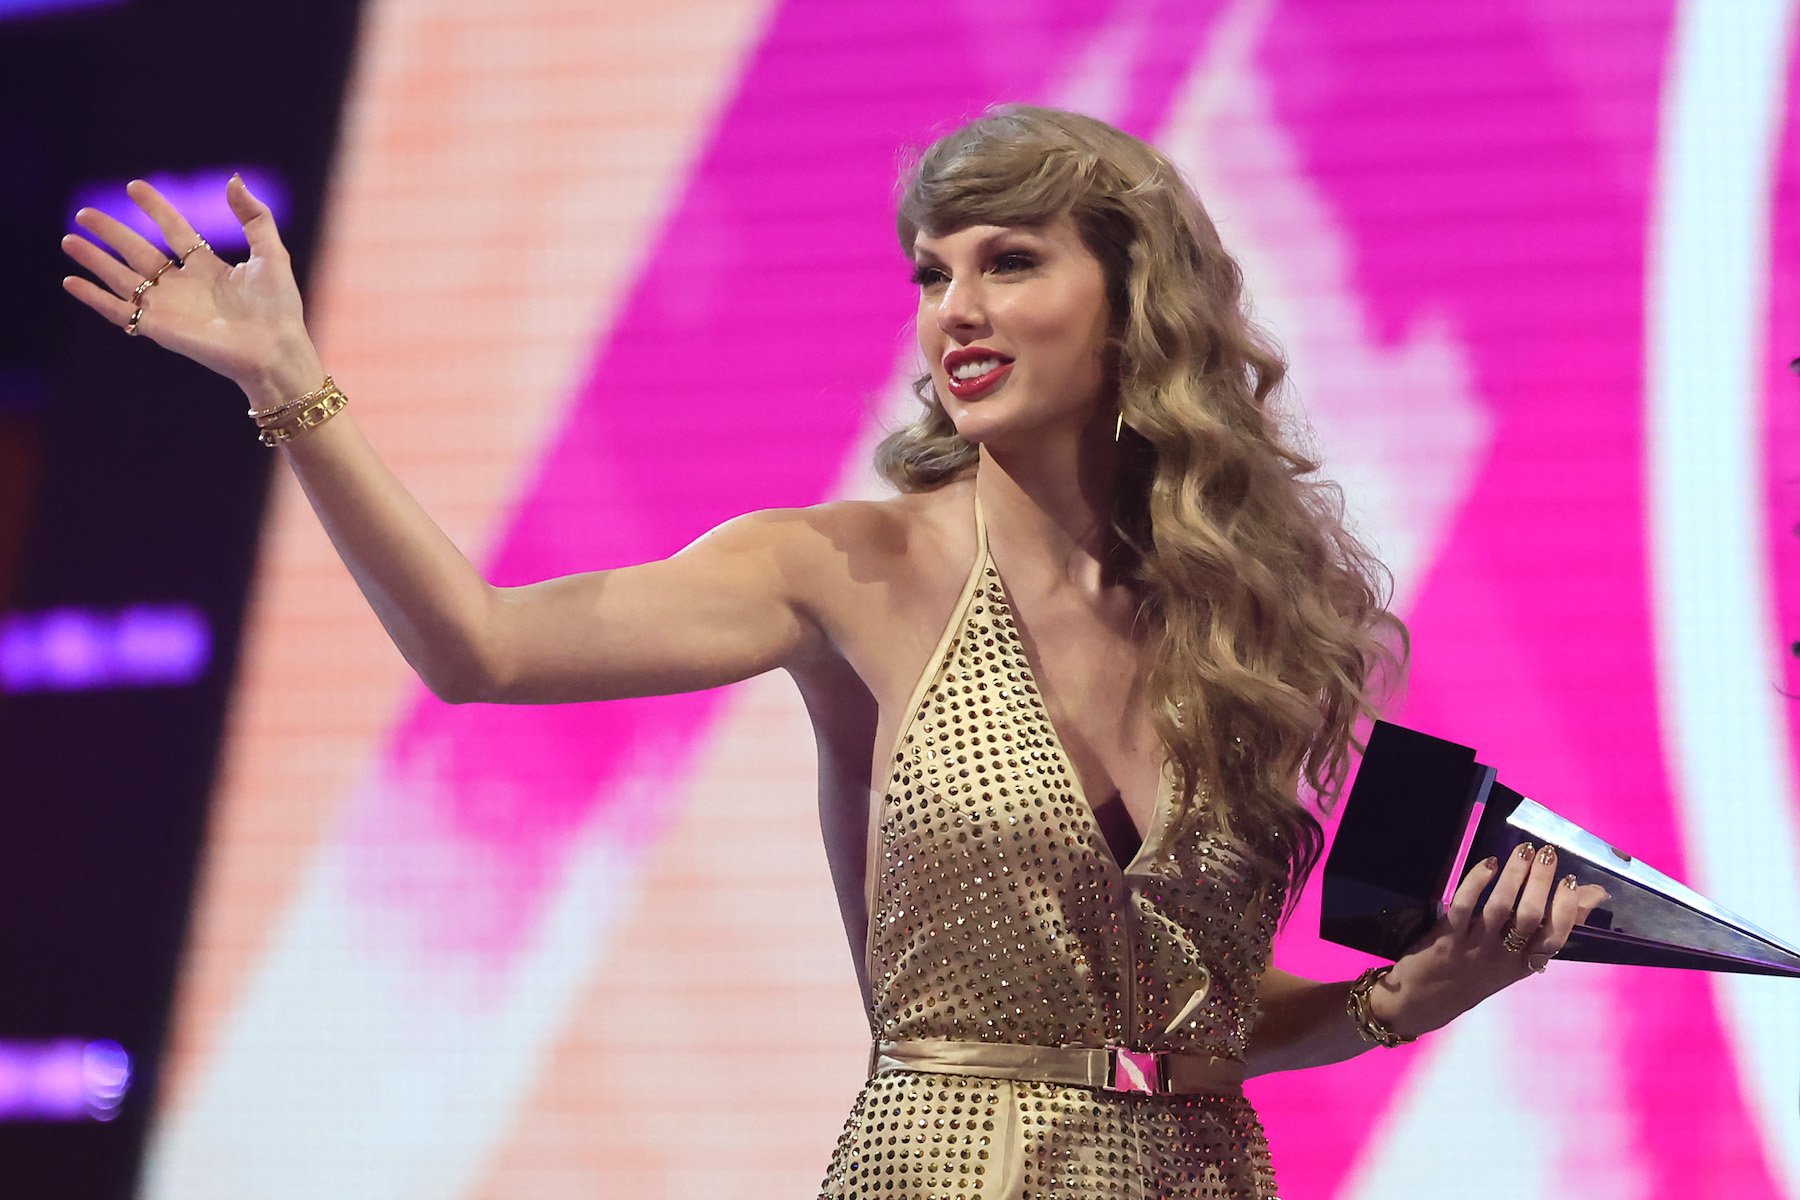 Taylor Swift, one of the winners at the 2022 AMAs, on stage at the AMAs